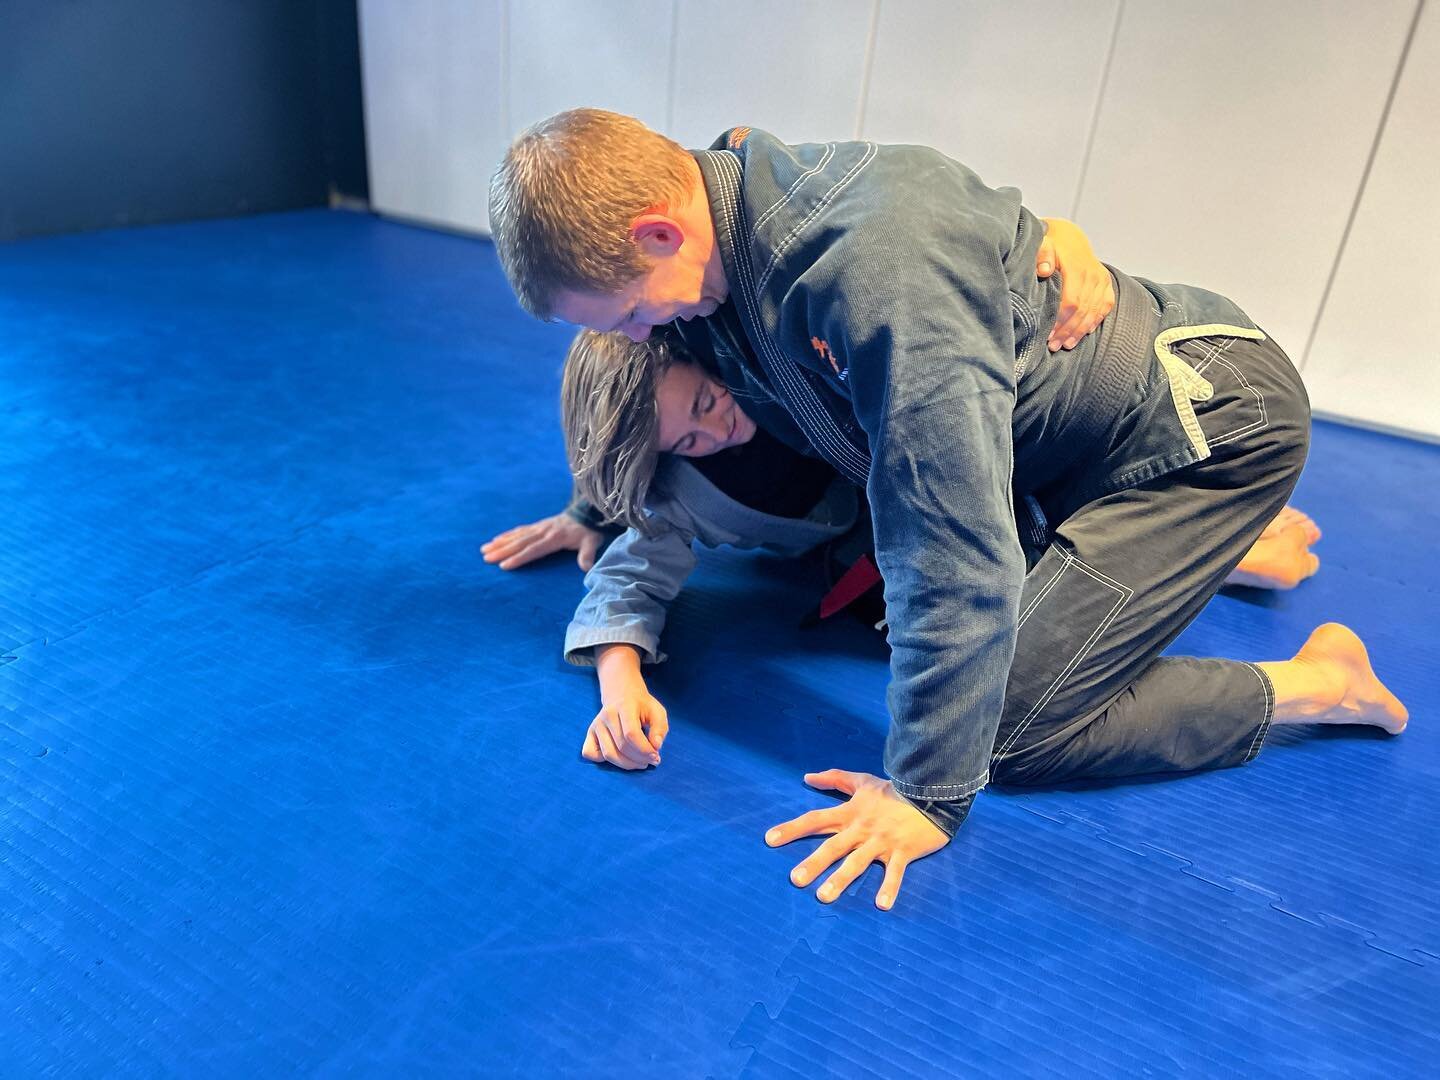 It&rsquo;s Friday! Be proud of your accomplishments this week. 

Shotokan and Jiu-Jitsu tonight,
Kids and adults Jitsu-Jitsu in the morning.

Book a free introductory lesson on the new website and check out our 12 Beginner Essentials Package for the 